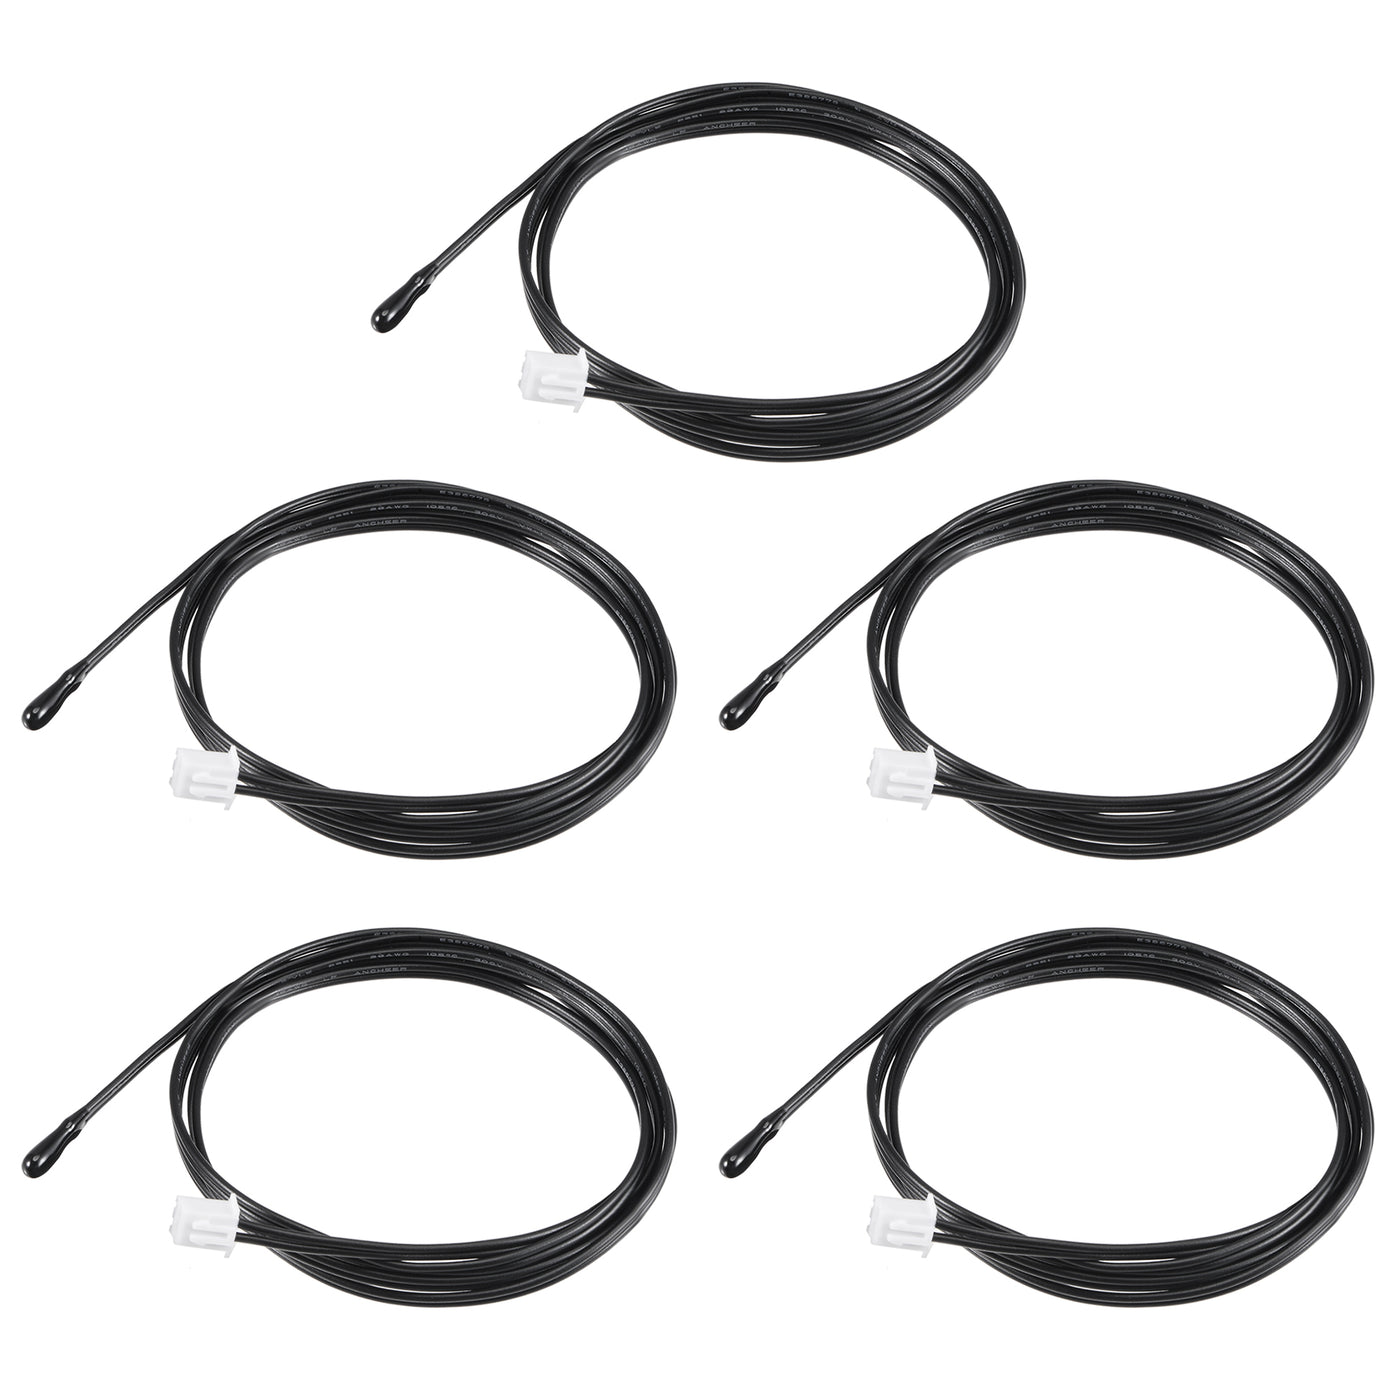 uxcell Uxcell 5pcs 50K NTC Temperature Sensor Probe 3.3ft Digital Thermometer Extension Cable